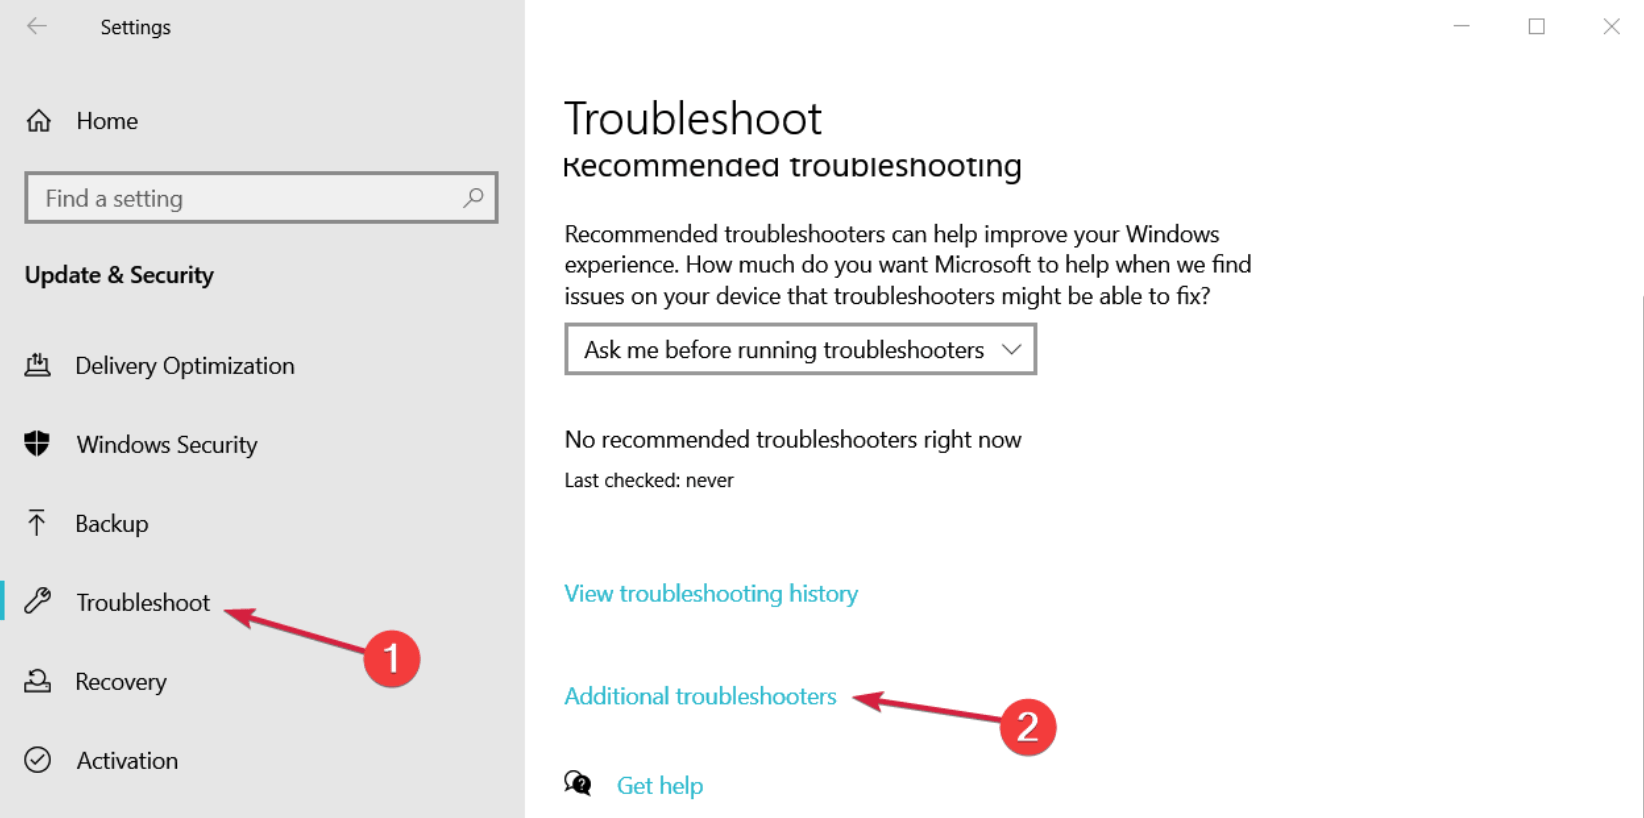 Choose Troubleshoot from the left navigation bar